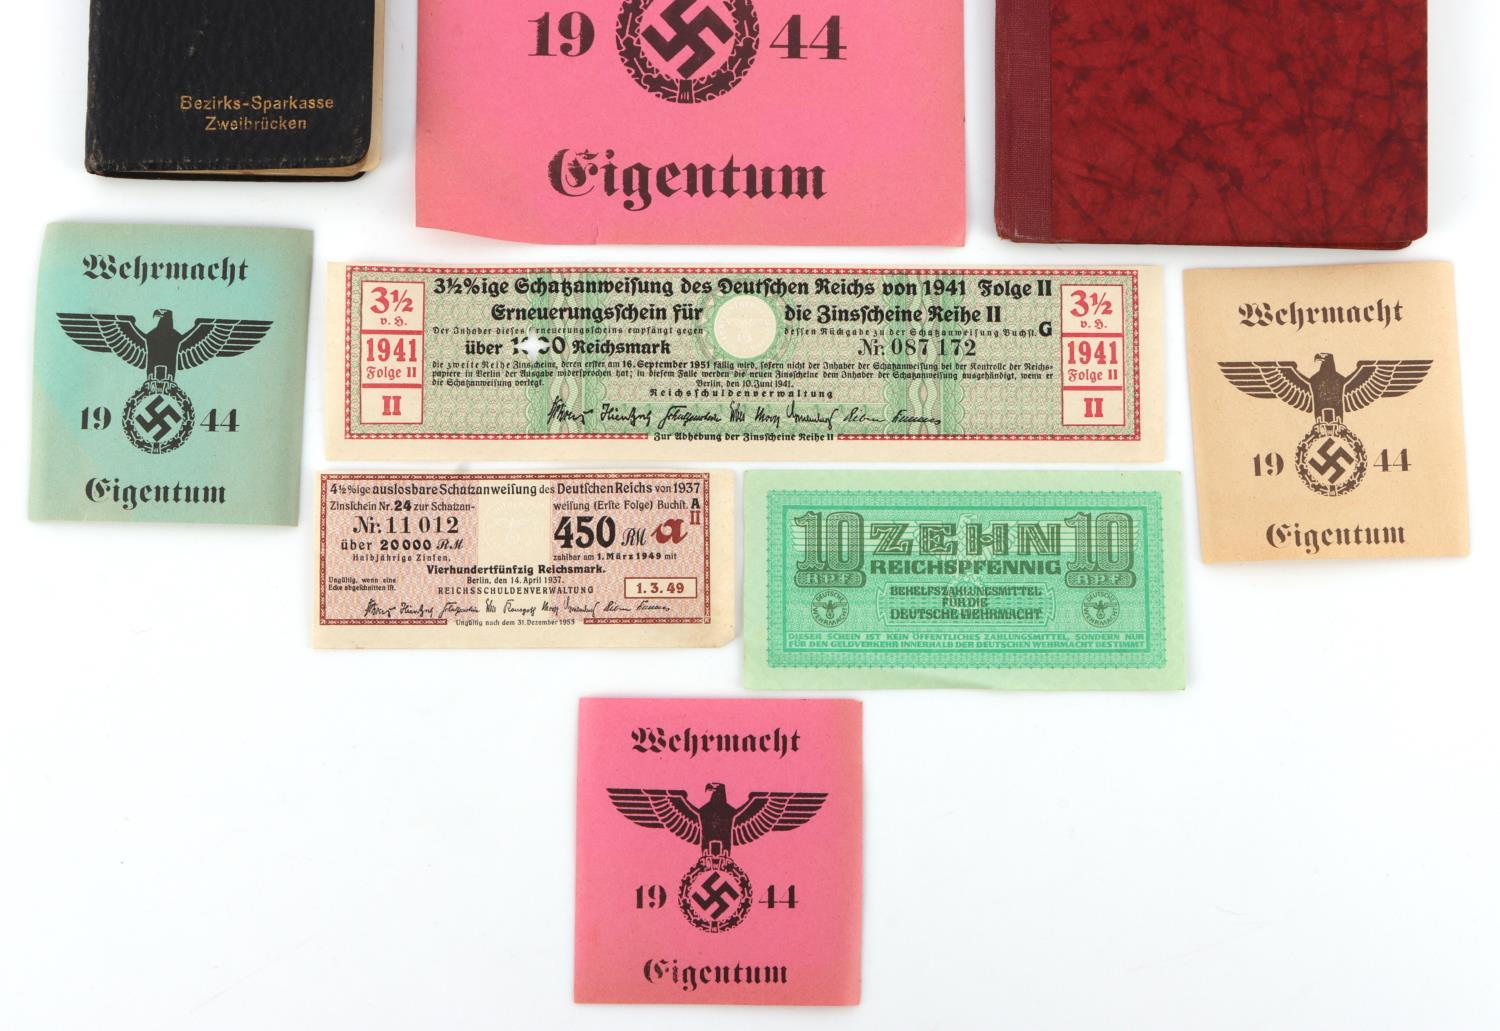 WWII GERMAN CRATE LABELS TAX BOOK & PAY SCRIPT